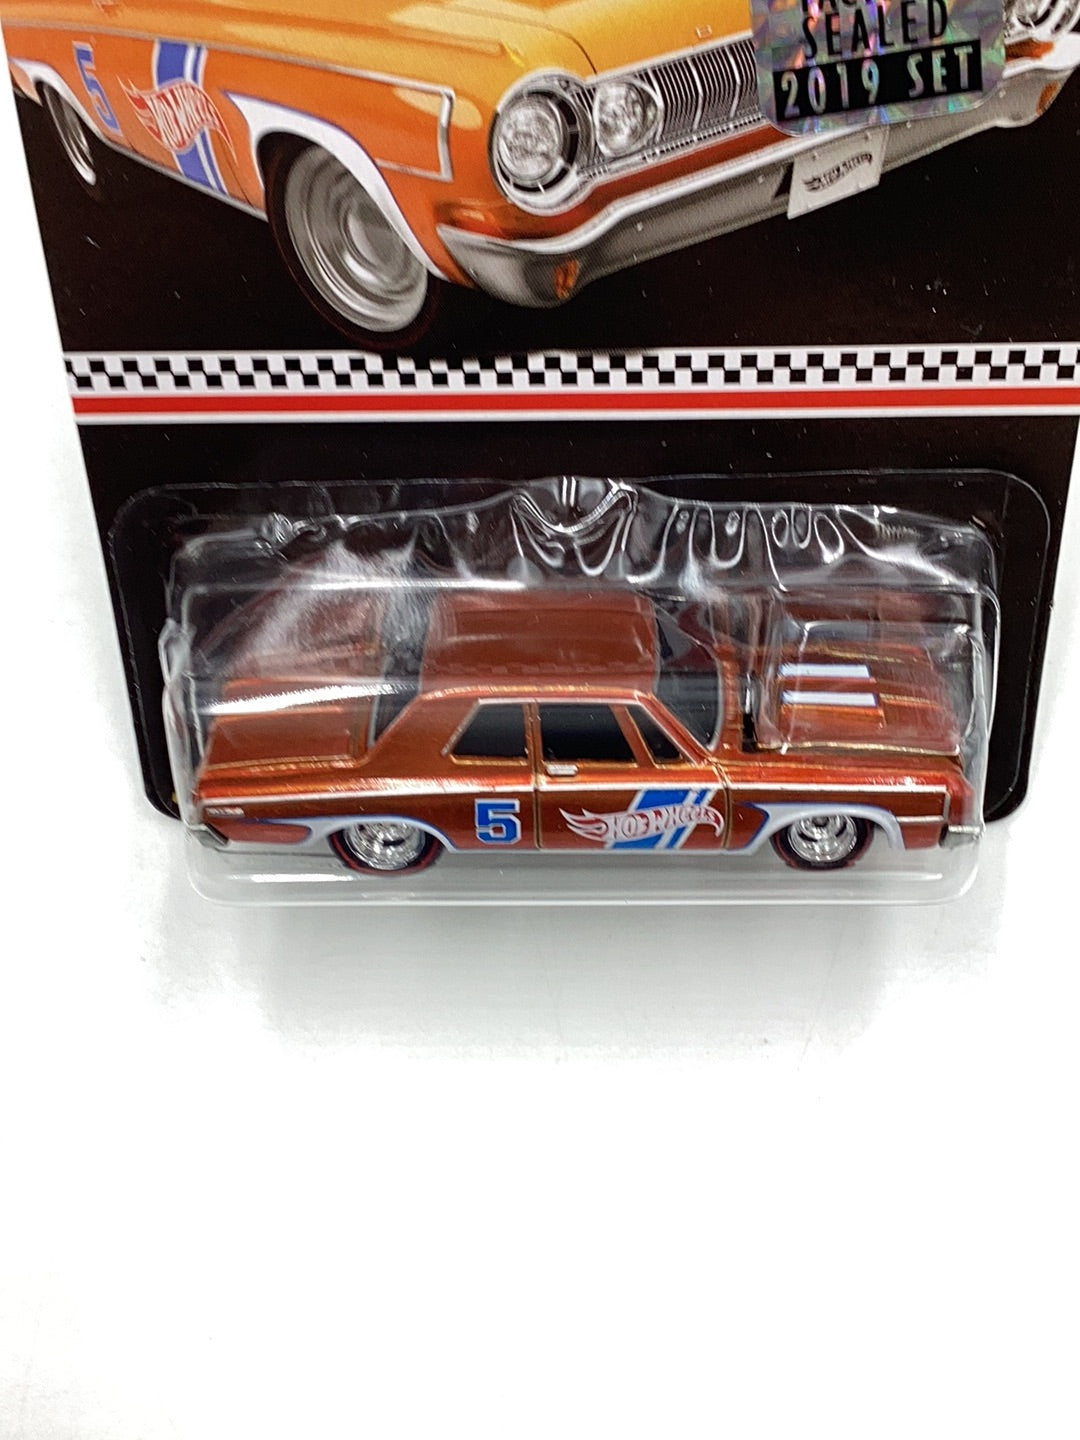 Hot wheels 2019 mail in collectors edition factory sealed sticker 64 Dodge 330